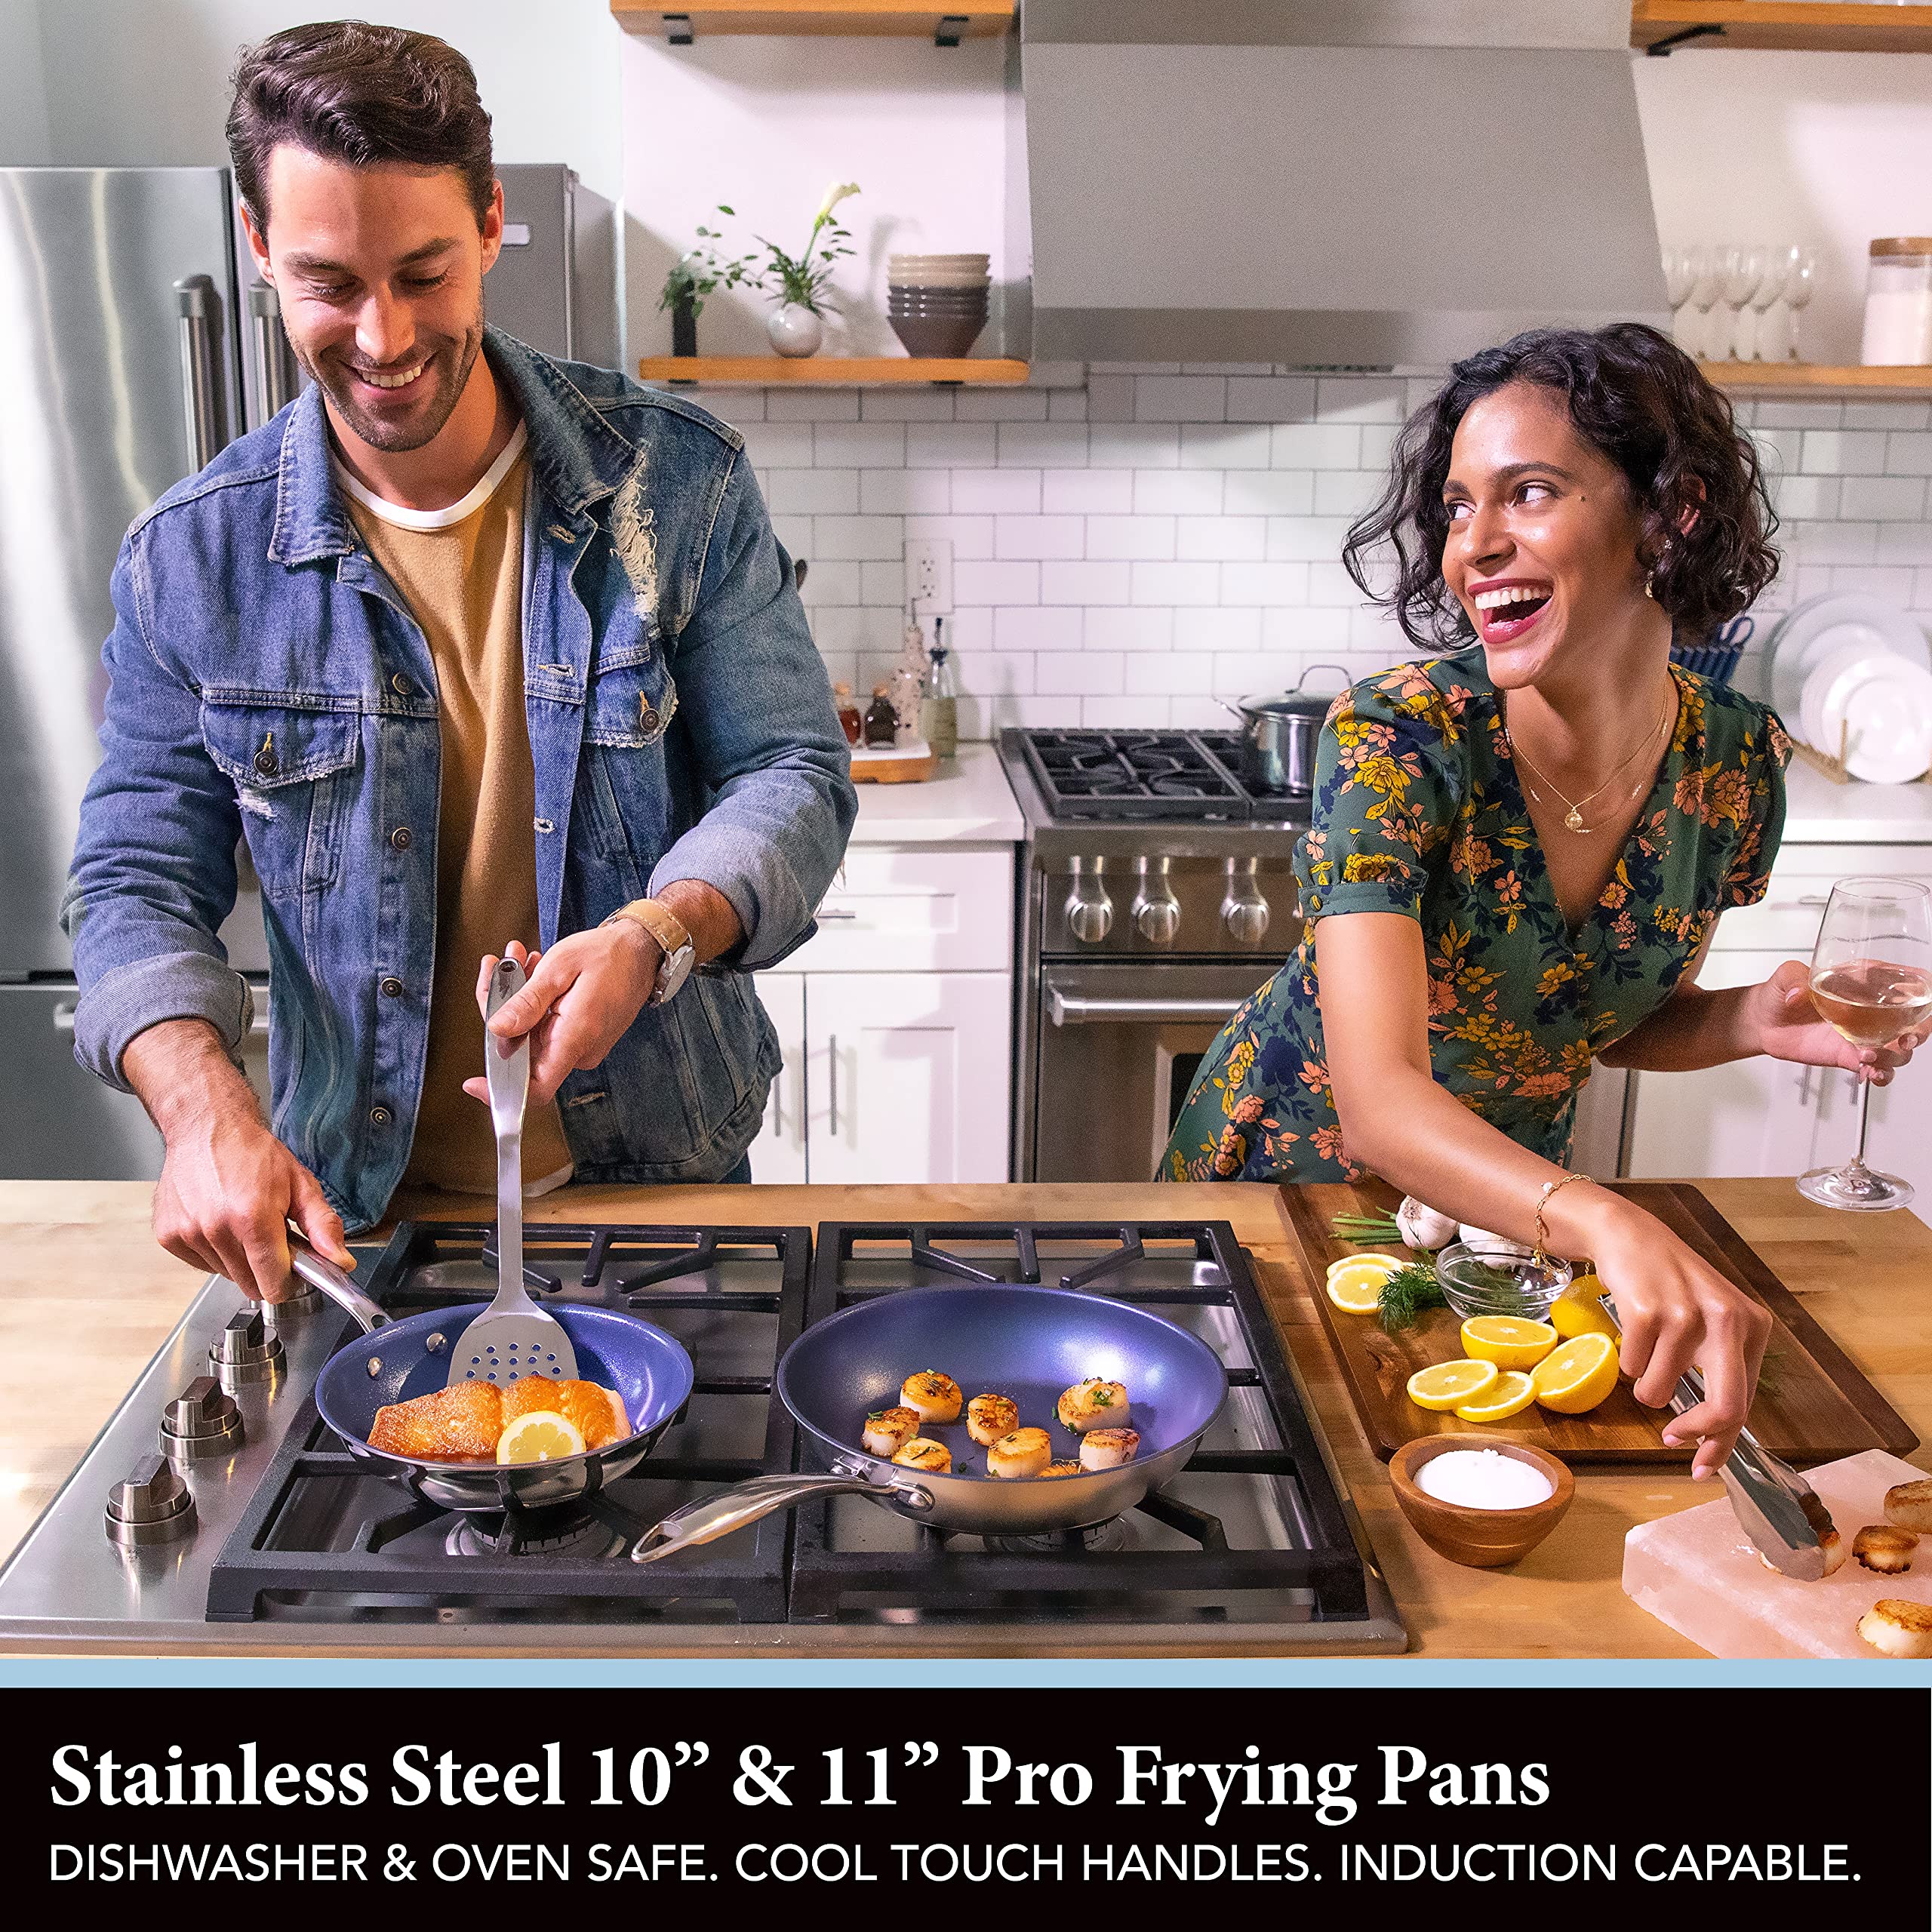 Granitestone Stainless Steel Nonstick Fry Pan Set, Tri-Ply Base, Stainless Steel 10” & 11” Skillets with Nonstick Mineral Coating, 100% PFOA Free, Cool Touch Handles, Induction, Oven & Dishwasher Safe